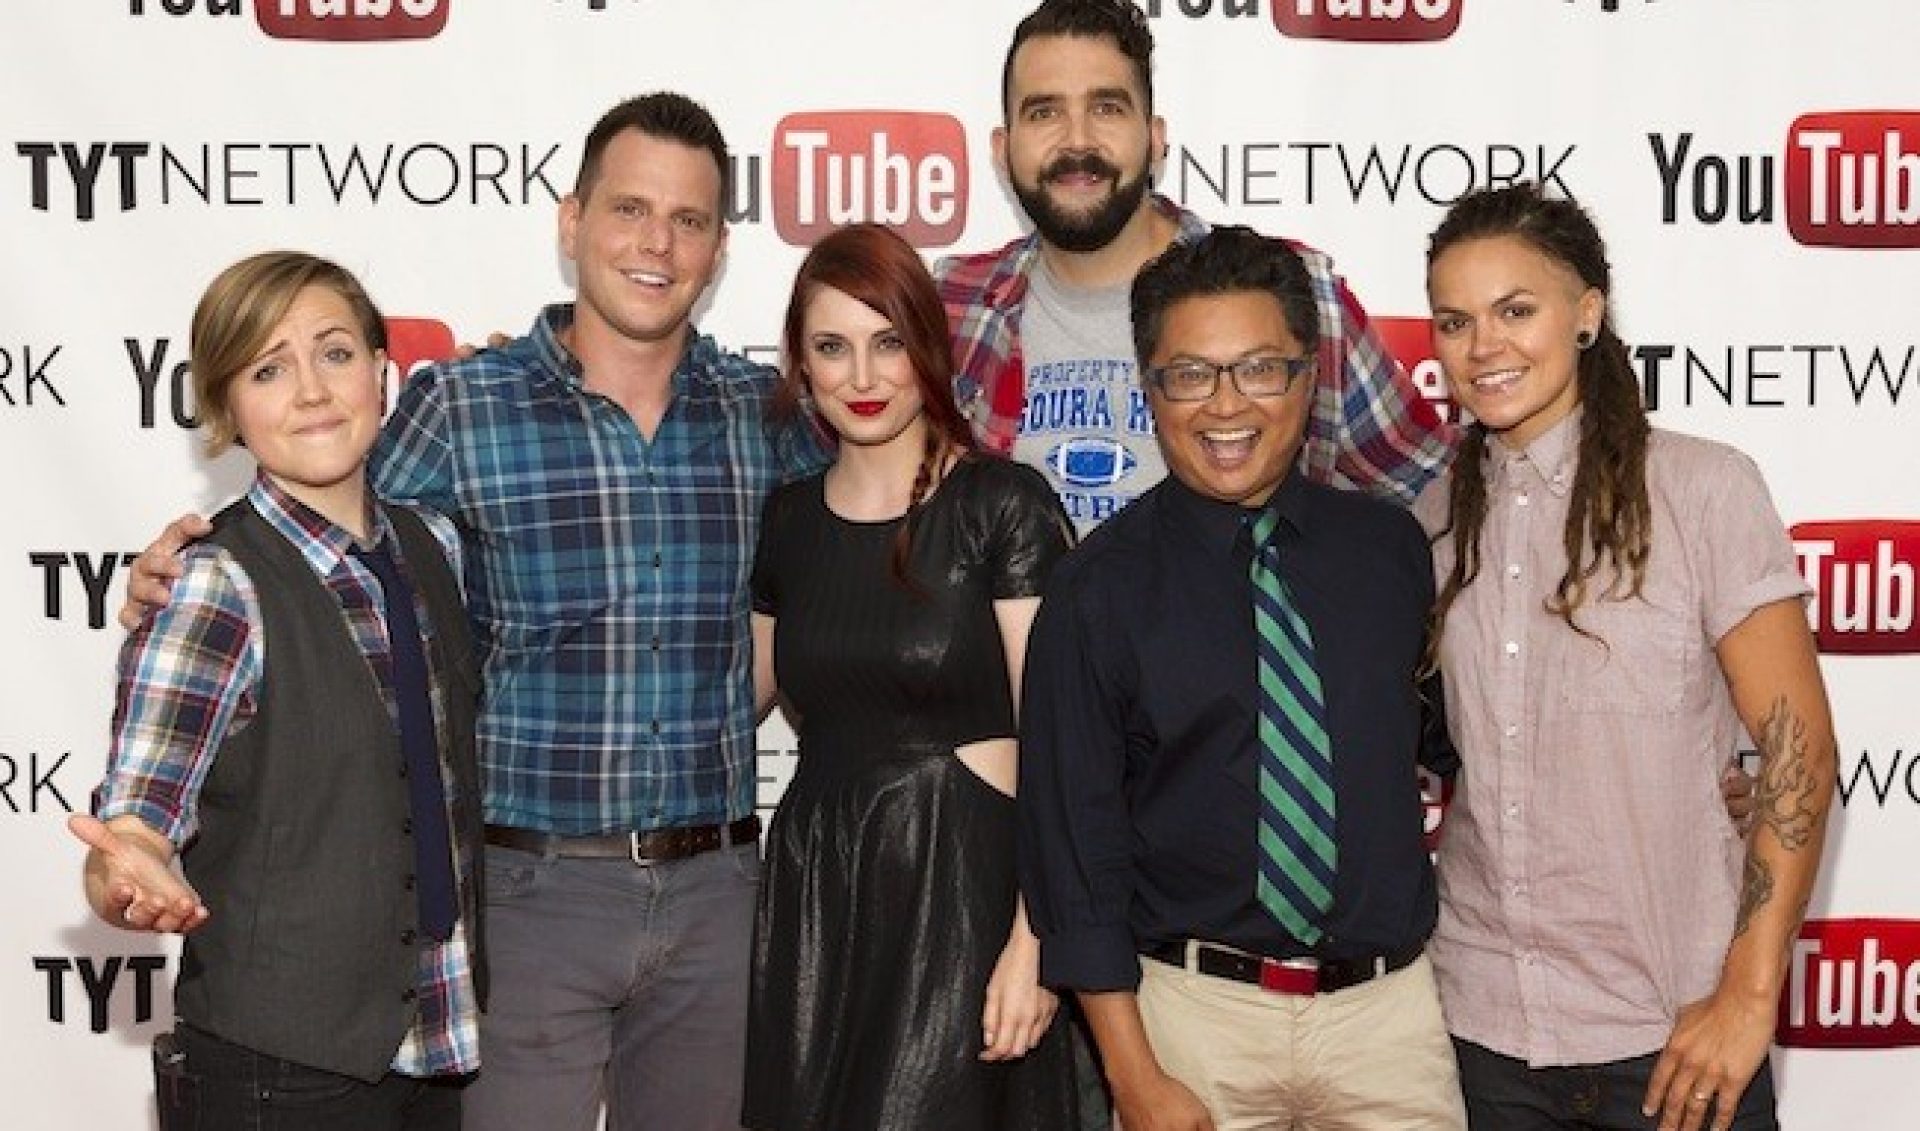 YouTube, The Young Turks Are #ProudToLove, Get Used To It